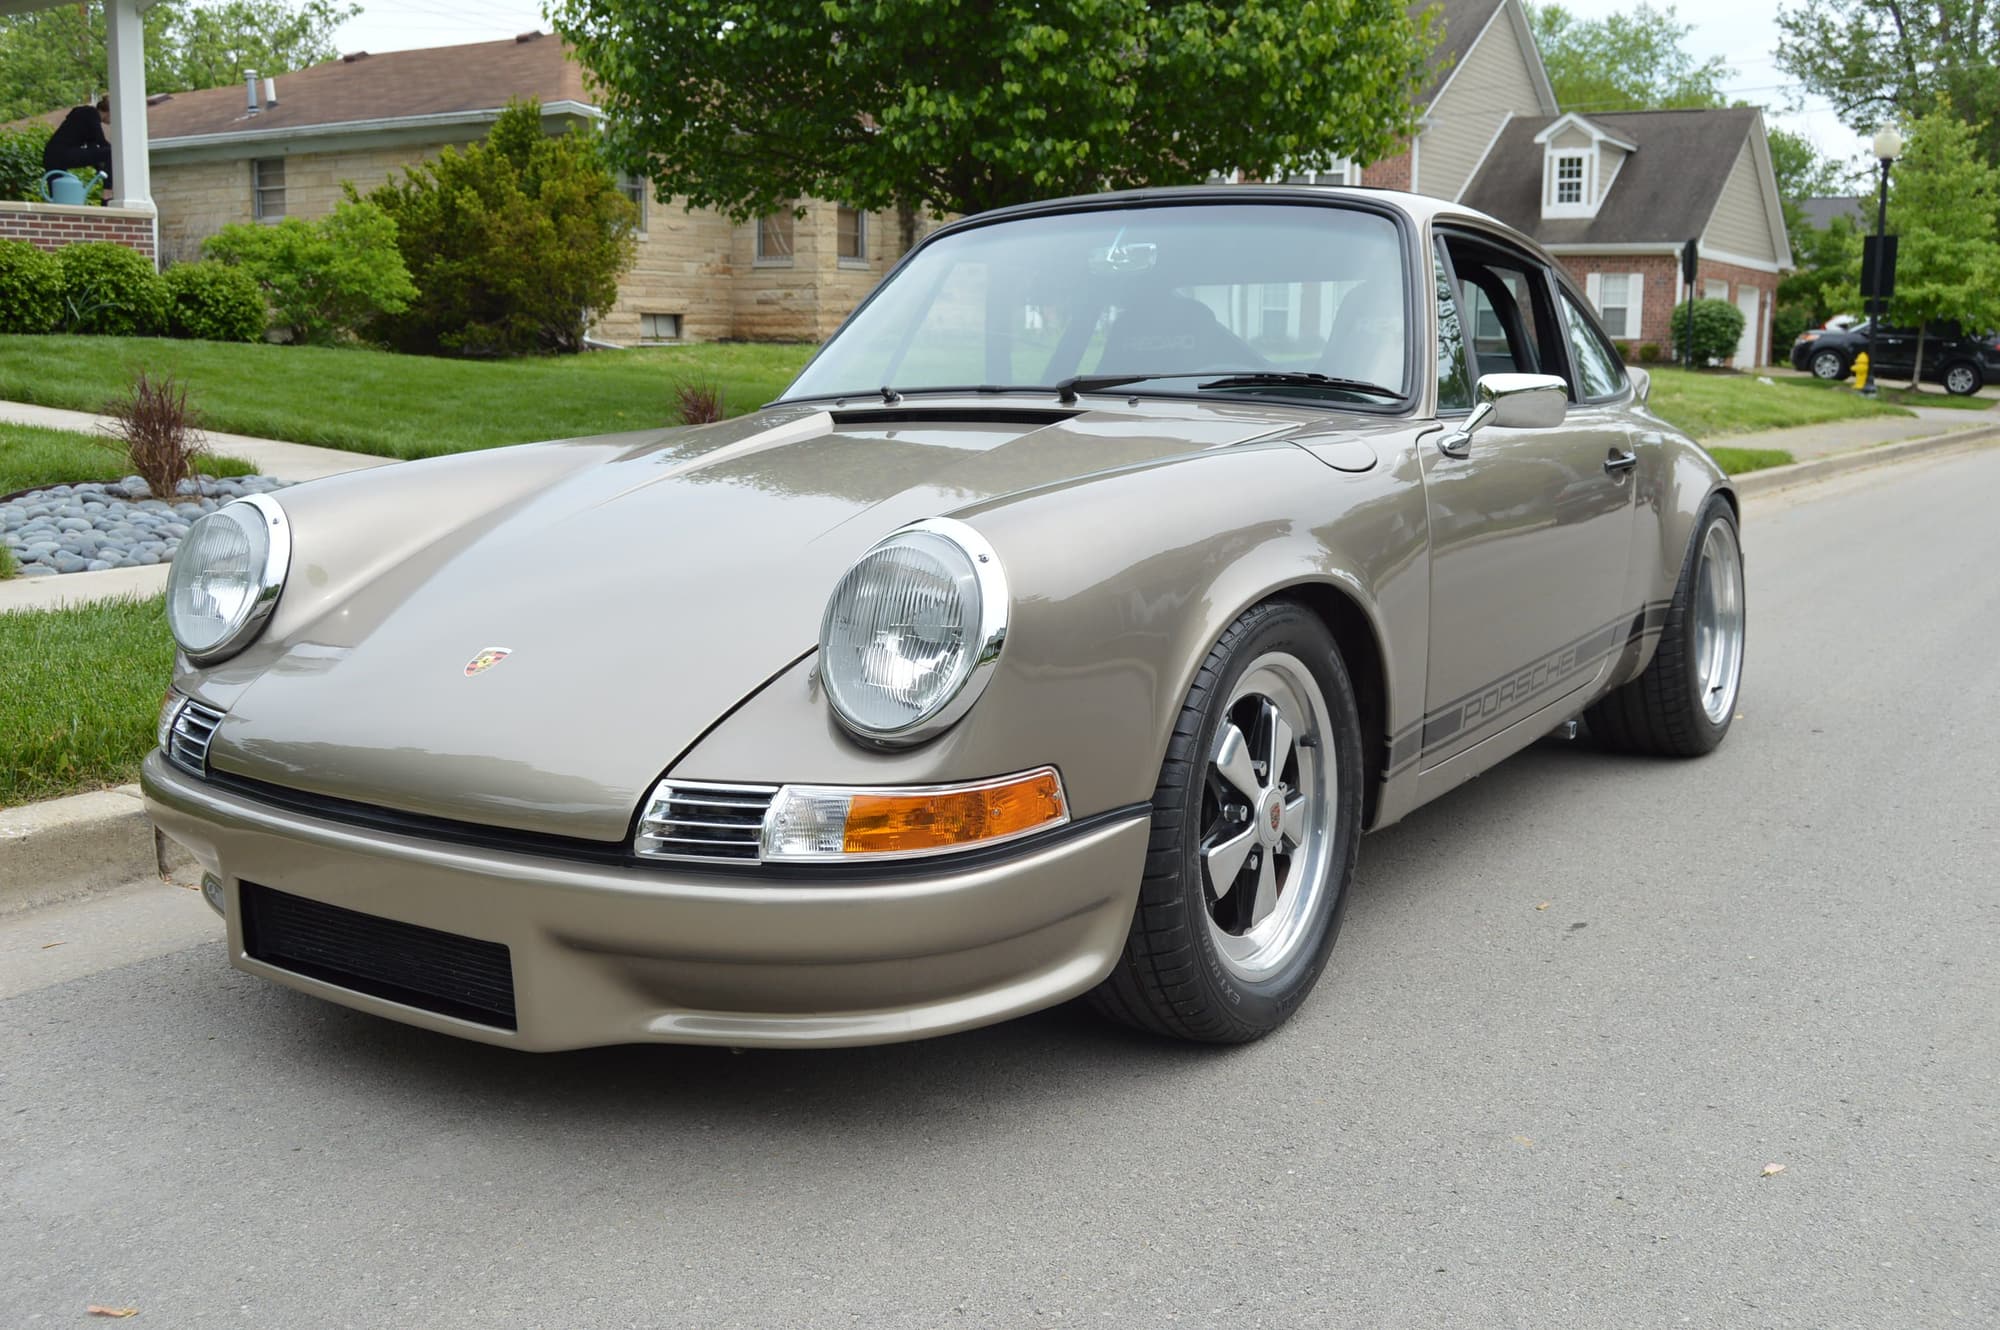 1982 Porsche 911 - Backdated 3.6L 911 - Used - VIN WP0AA091XCS121303 - 99,000 Miles - 6 cyl - 2WD - Manual - Coupe - Beige - Carmel, IN 46033, United States